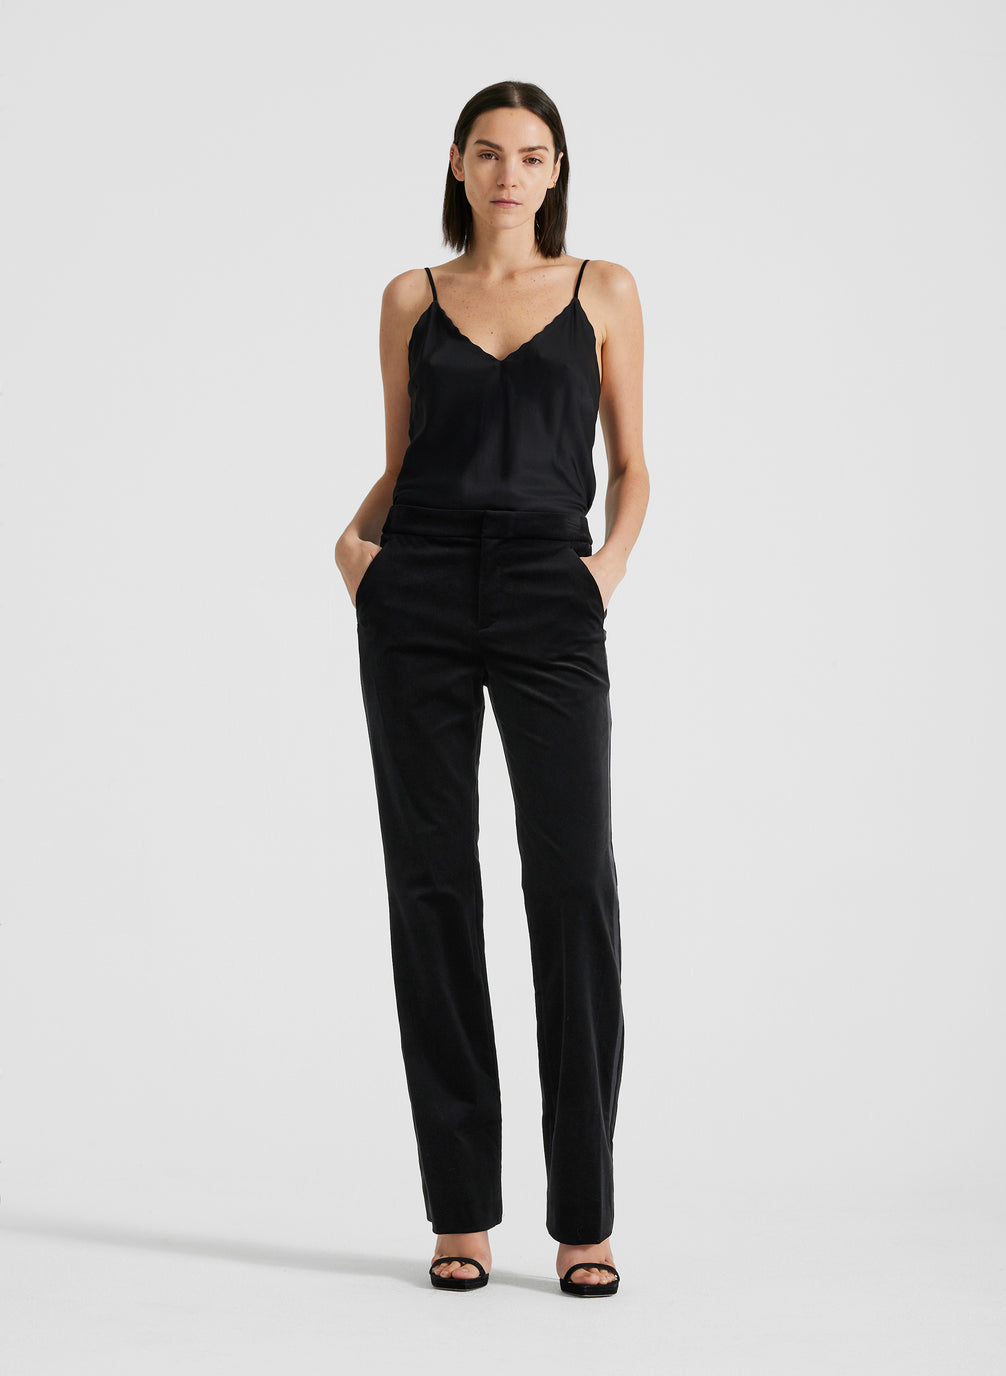 front view of woman wearing black satin camisole and black velvet pants